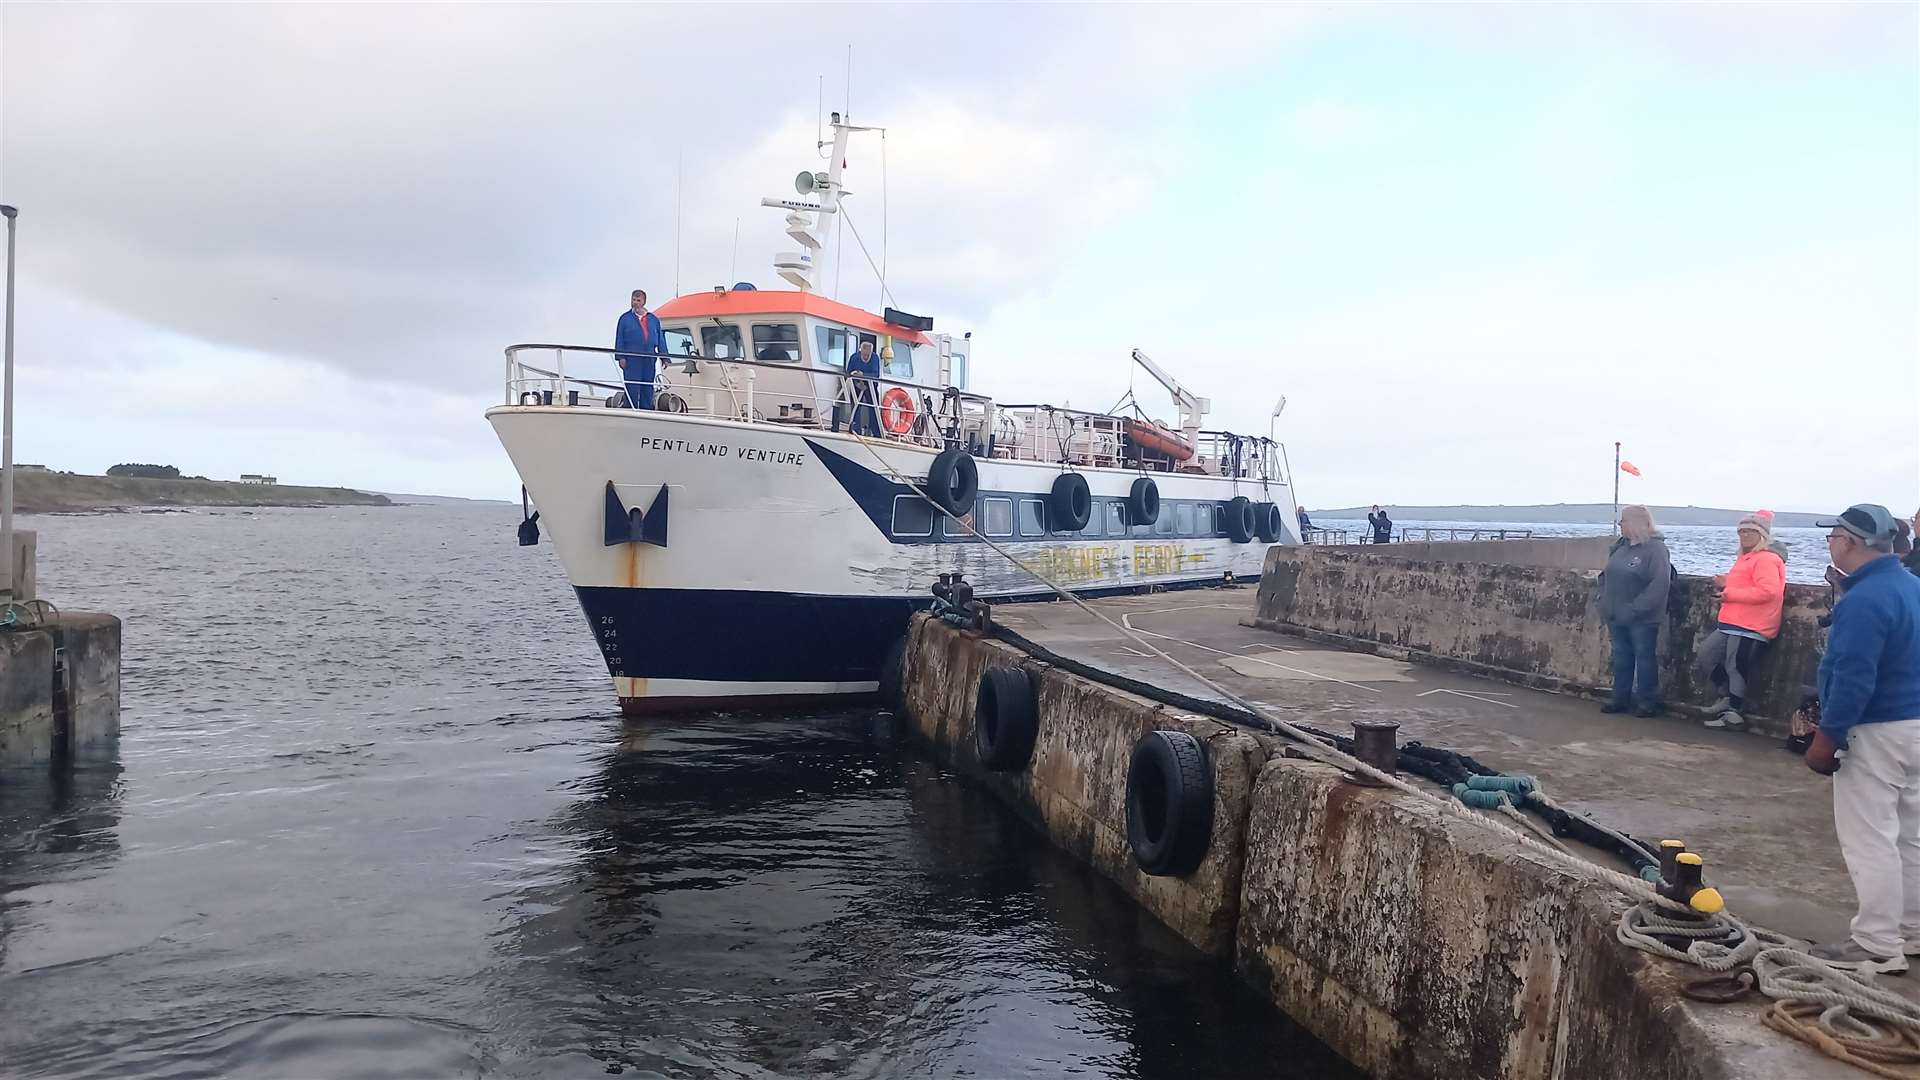 Derek Bremner sent this photograph as he waited to embark on the final journey with John O'Groats Ferries on the Pentland Venture.